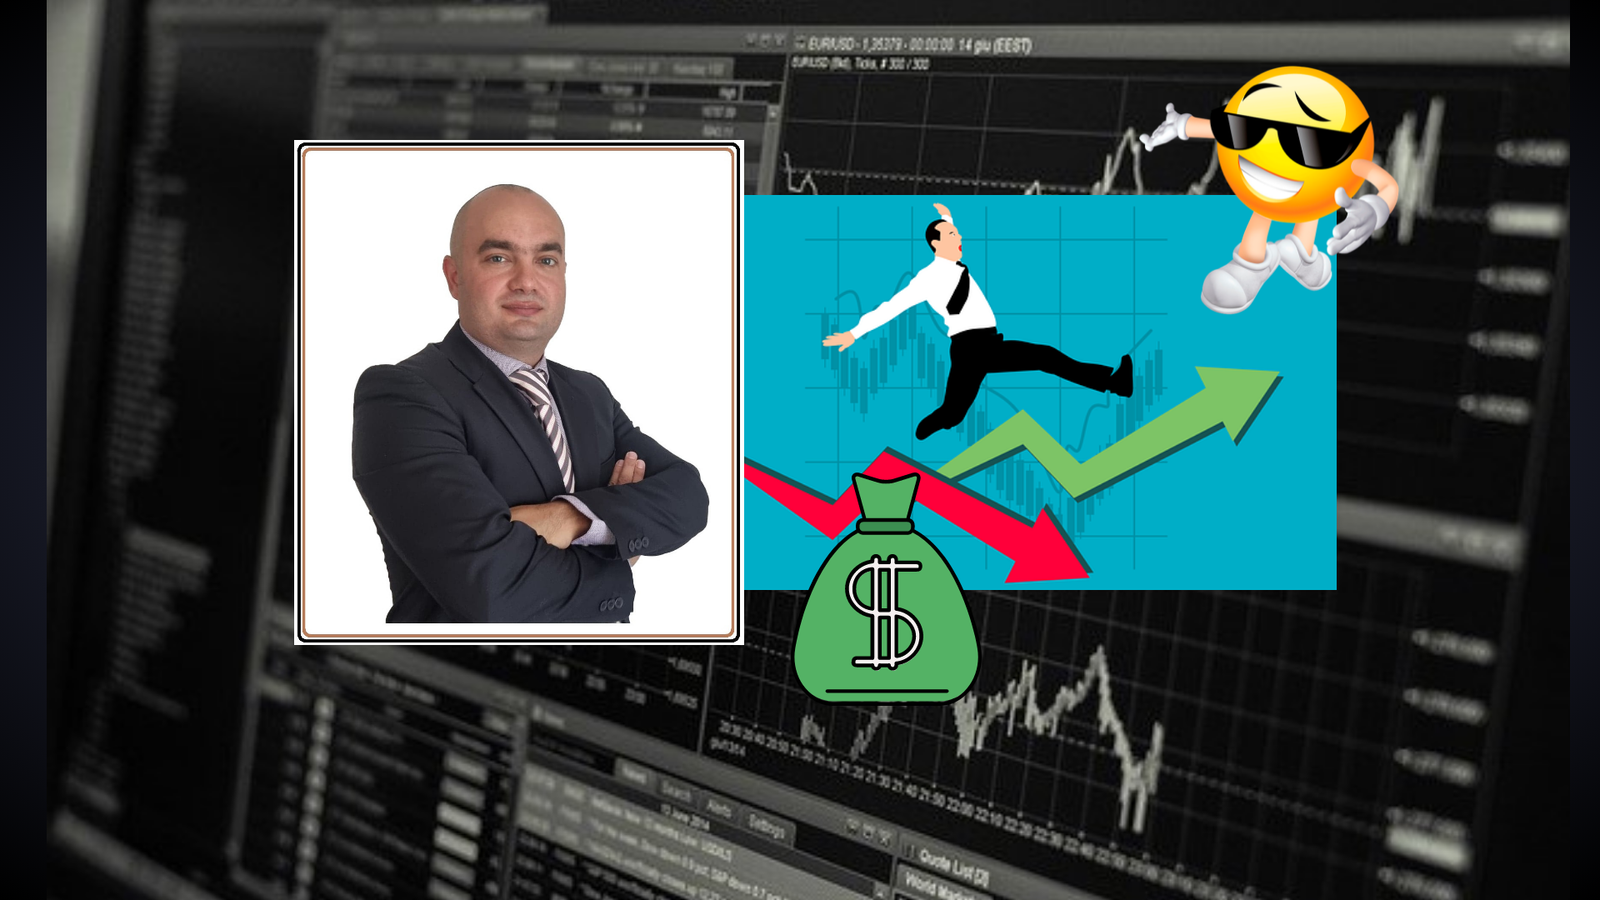 Don't Stumble Trading is designed to help individuals interested in trading to avoid common mistakes and pitfalls.